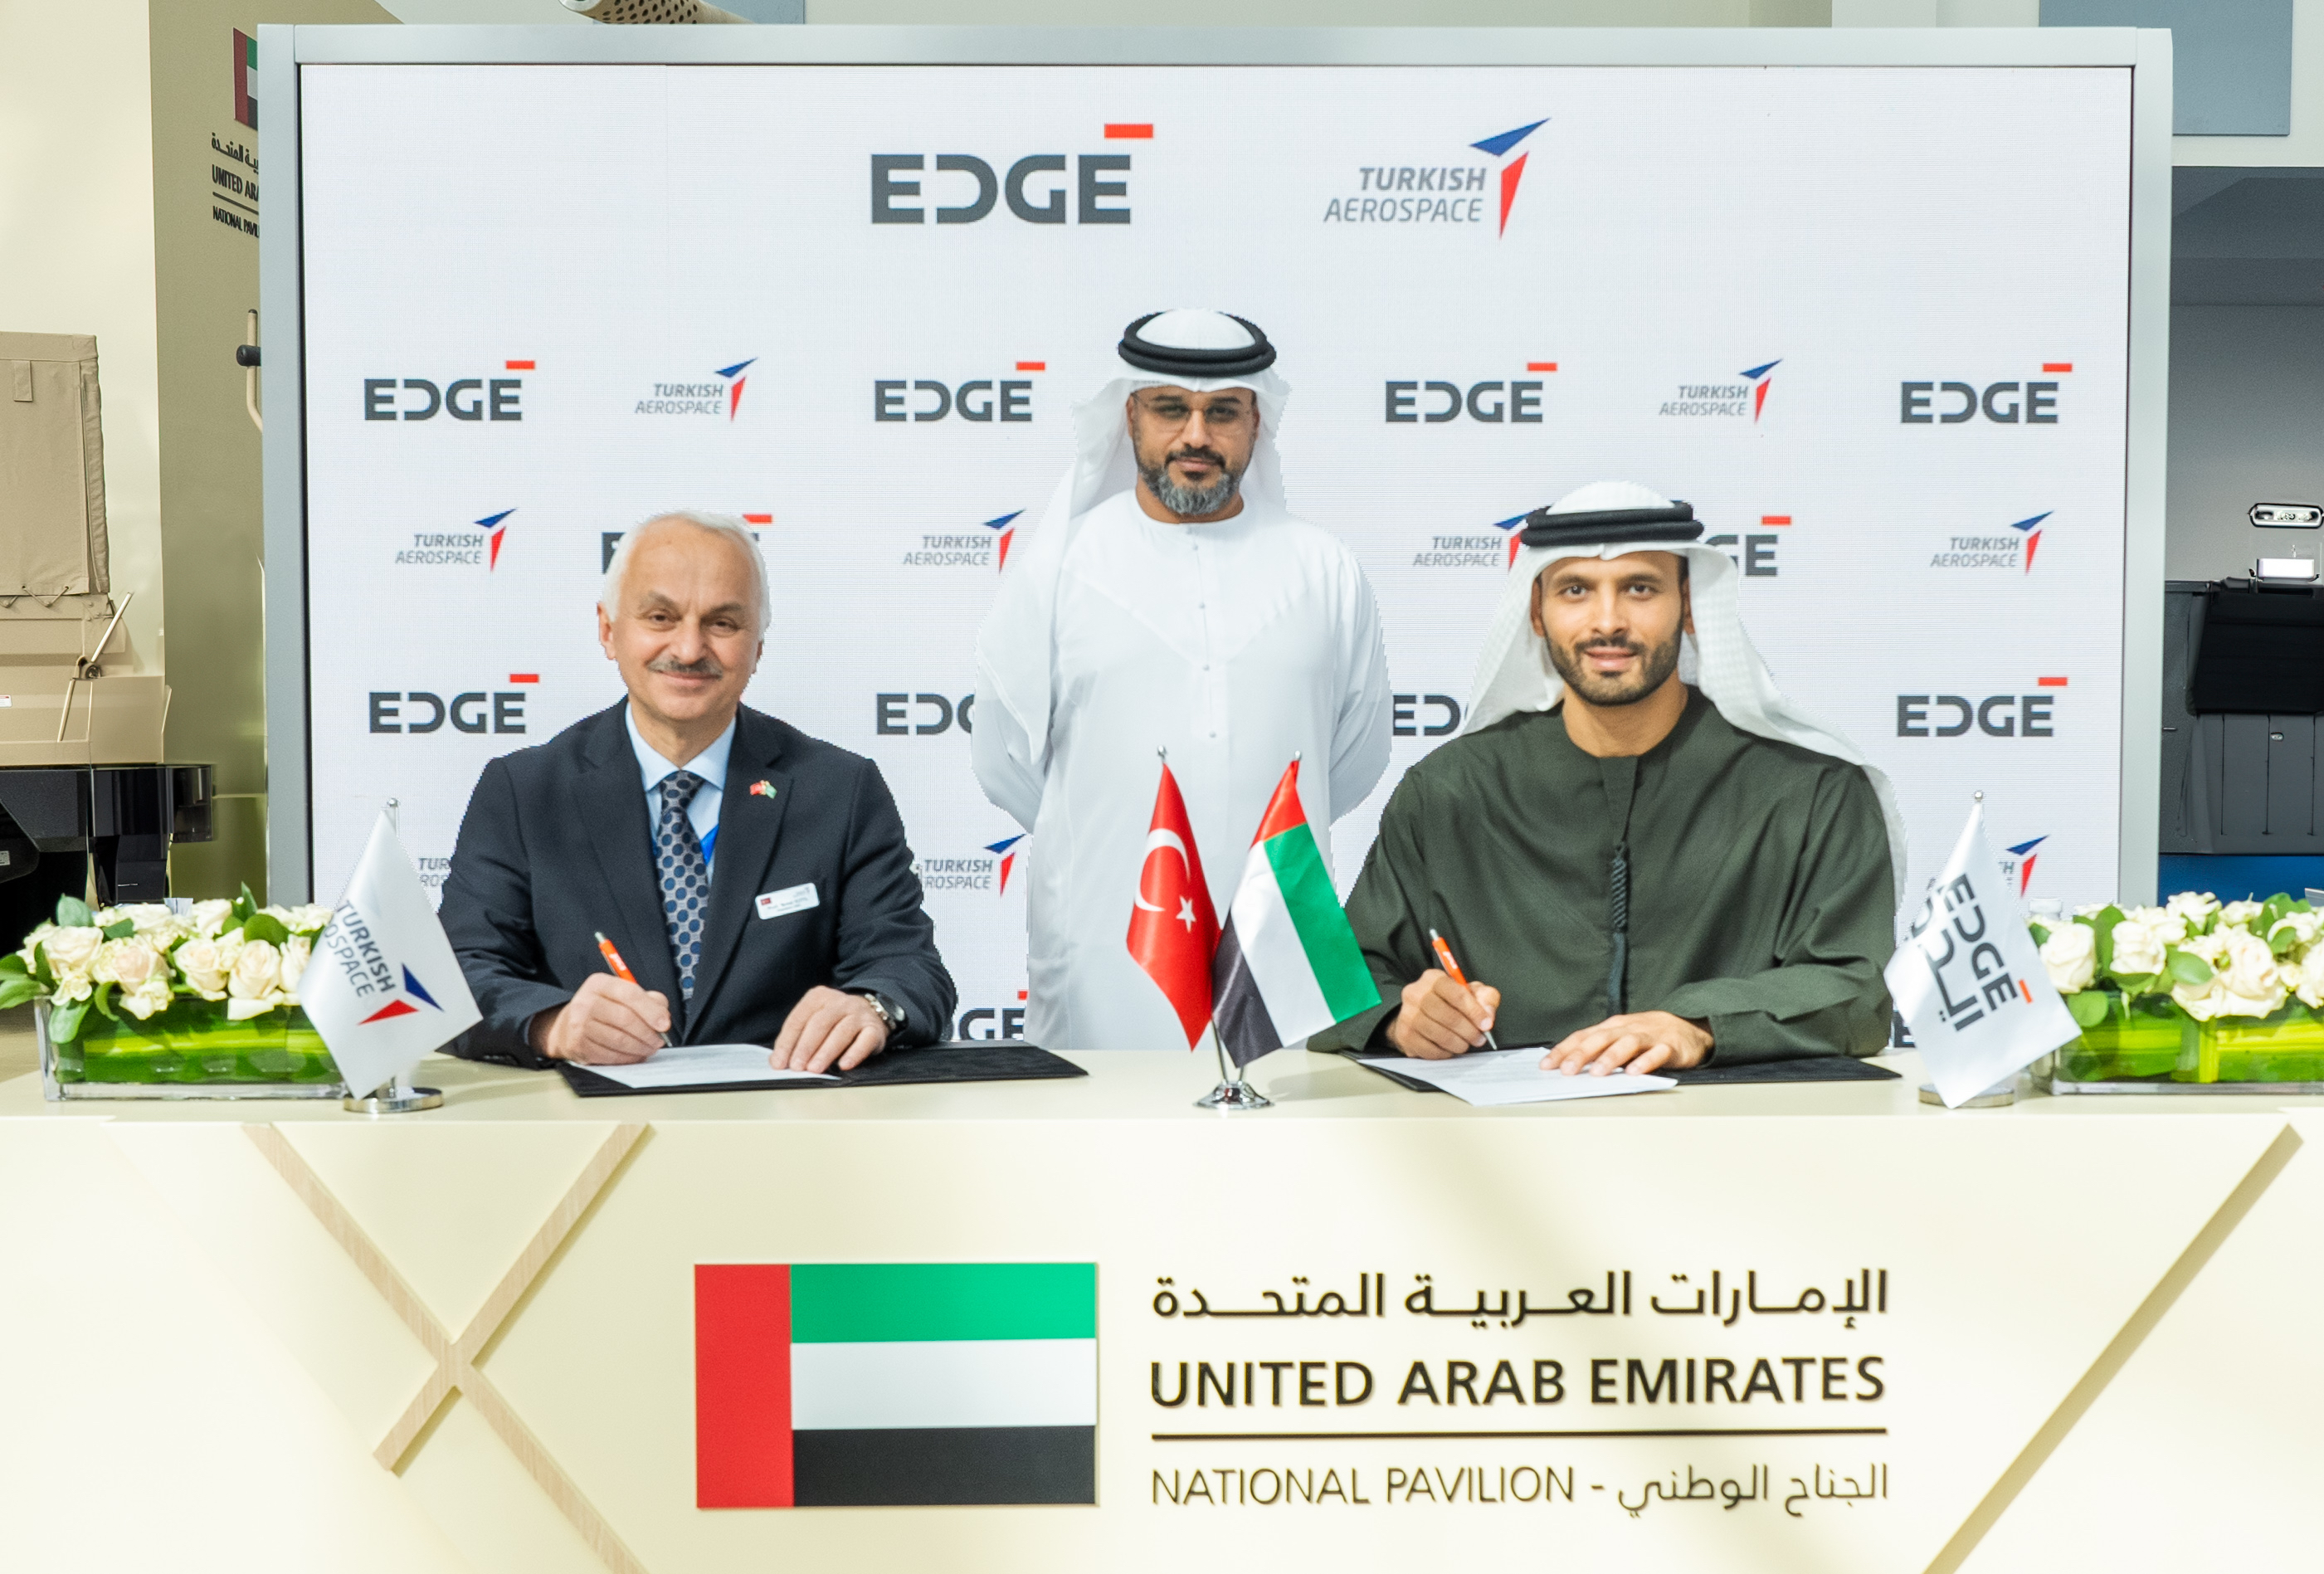 EDGE to Collaborate with TUSAŞ on Advanced Airborne-Domain Projects